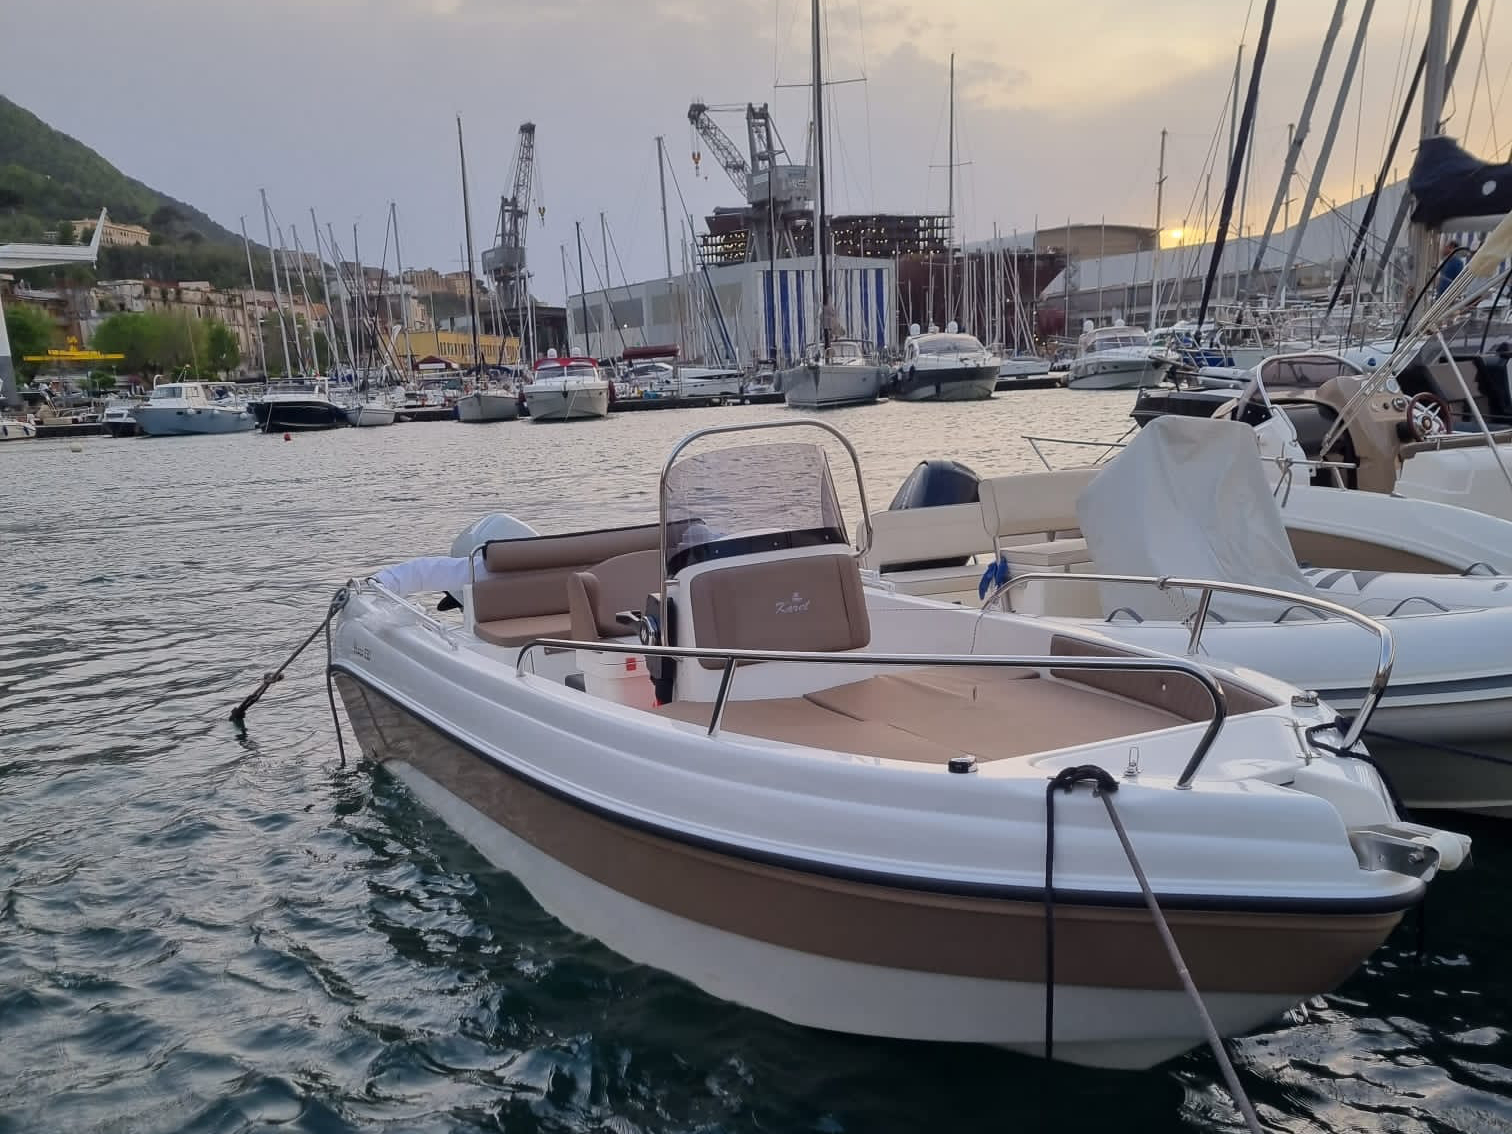 Ithaca 550 - Yacht Charter Castellammare di Stabia & Boat hire in Italy Campania Bay of Naples Castellammare di Stabia Porto di Castellammare di Stabia 1